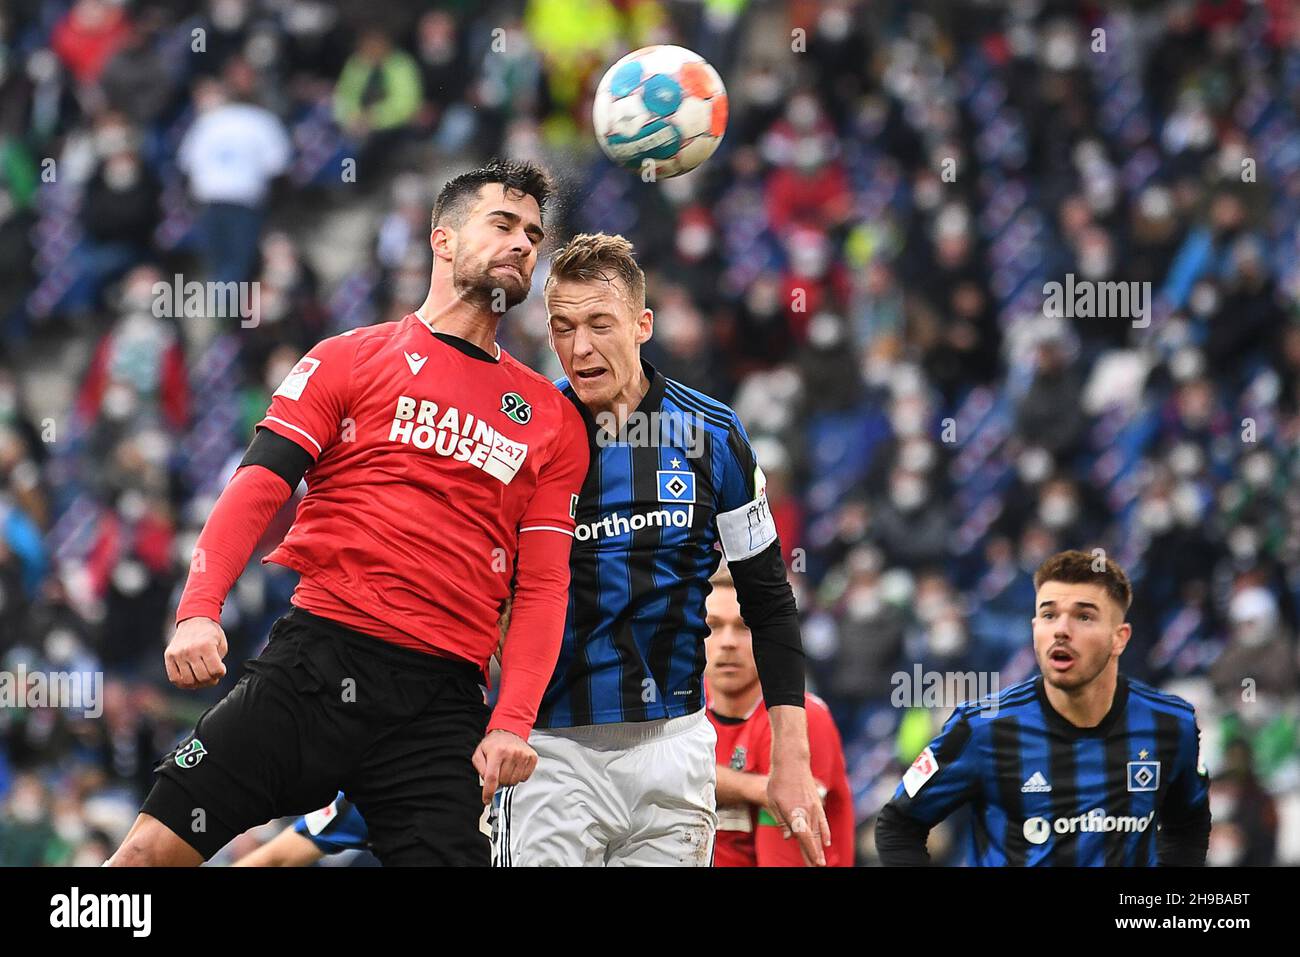 Hanover, Germany. 05th Dec, 2021. Football: 2. Bundesliga, Hannover 96 - Hamburger SV, Matchday 16 at HDI Arena. Hannover's Luka Krajnc (l) plays against Hamburg's Sebastian Schonlau. Credit: Swen Pförtner/dpa - IMPORTANT NOTE: In accordance with the regulations of the DFL Deutsche Fußball Liga and/or the DFB Deutscher Fußball-Bund, it is prohibited to use or have used photographs taken in the stadium and/or of the match in the form of sequence pictures and/or video-like photo series./dpa/Alamy Live News Stock Photo